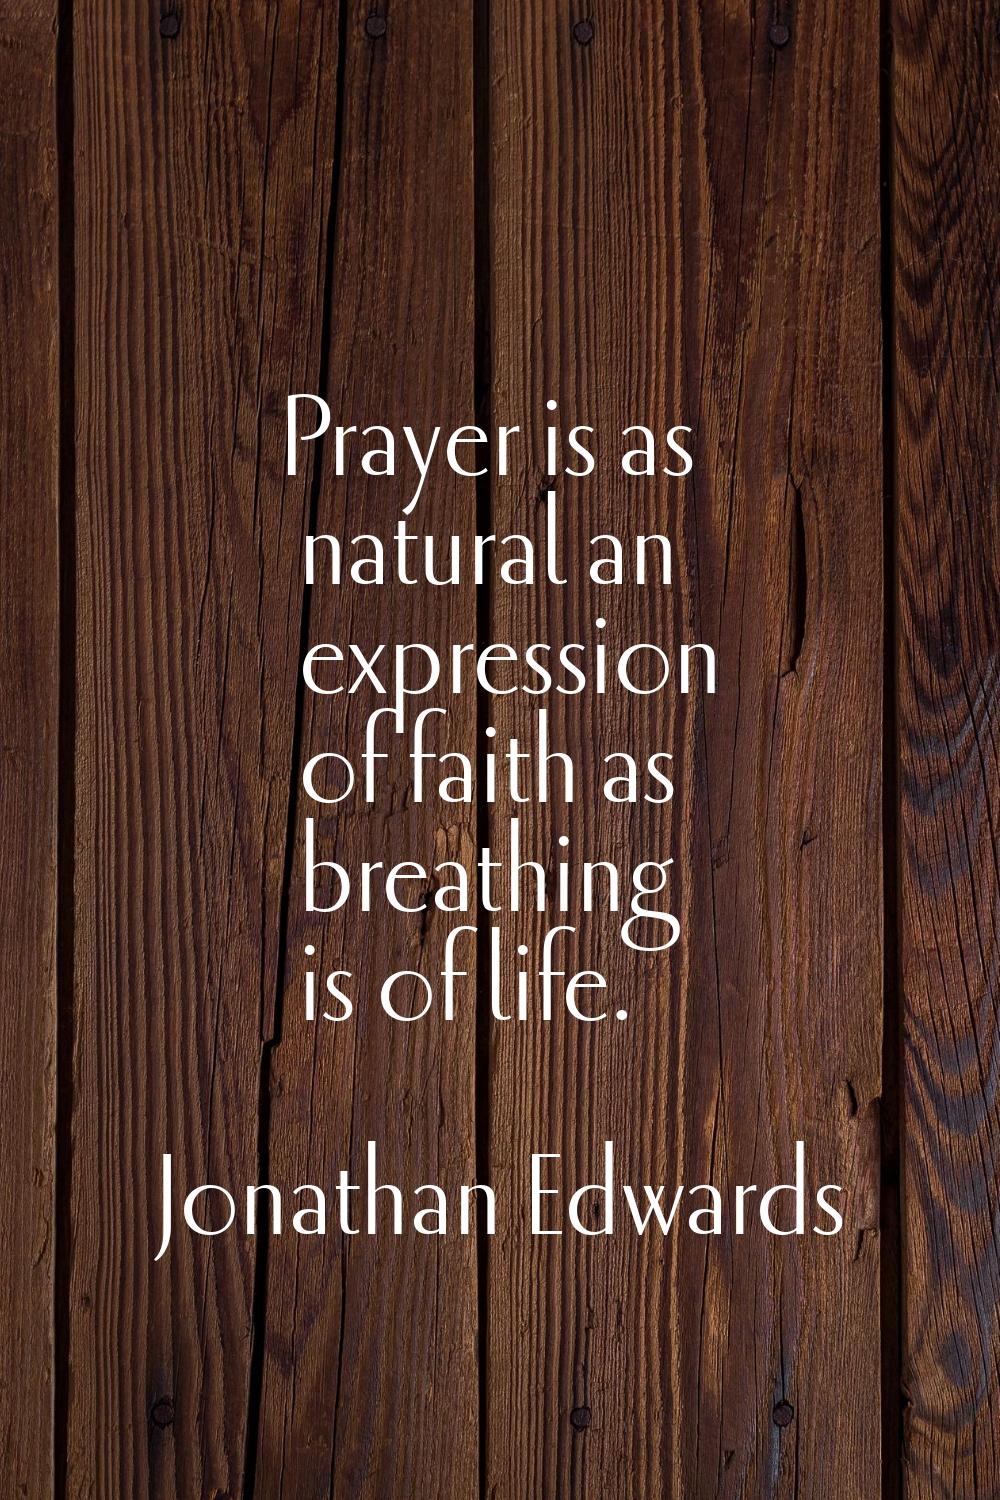 Prayer is as natural an expression of faith as breathing is of life.